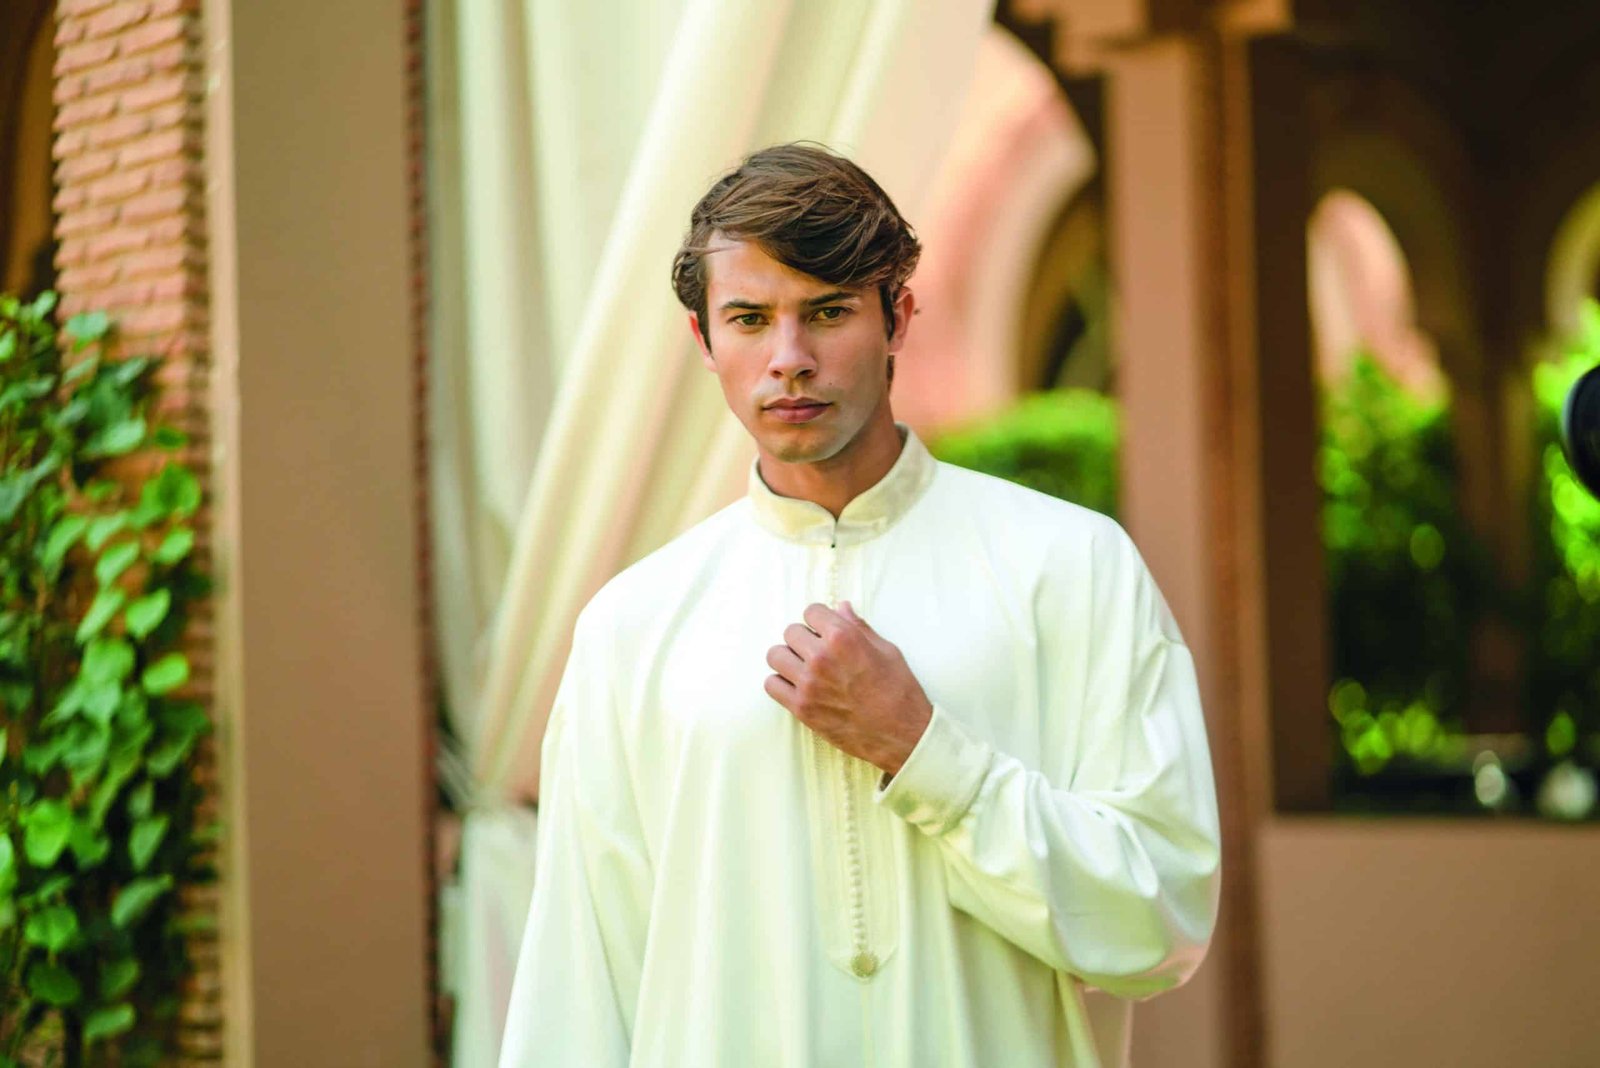 A young man in a white muslim outfit, made in Marrakesh.